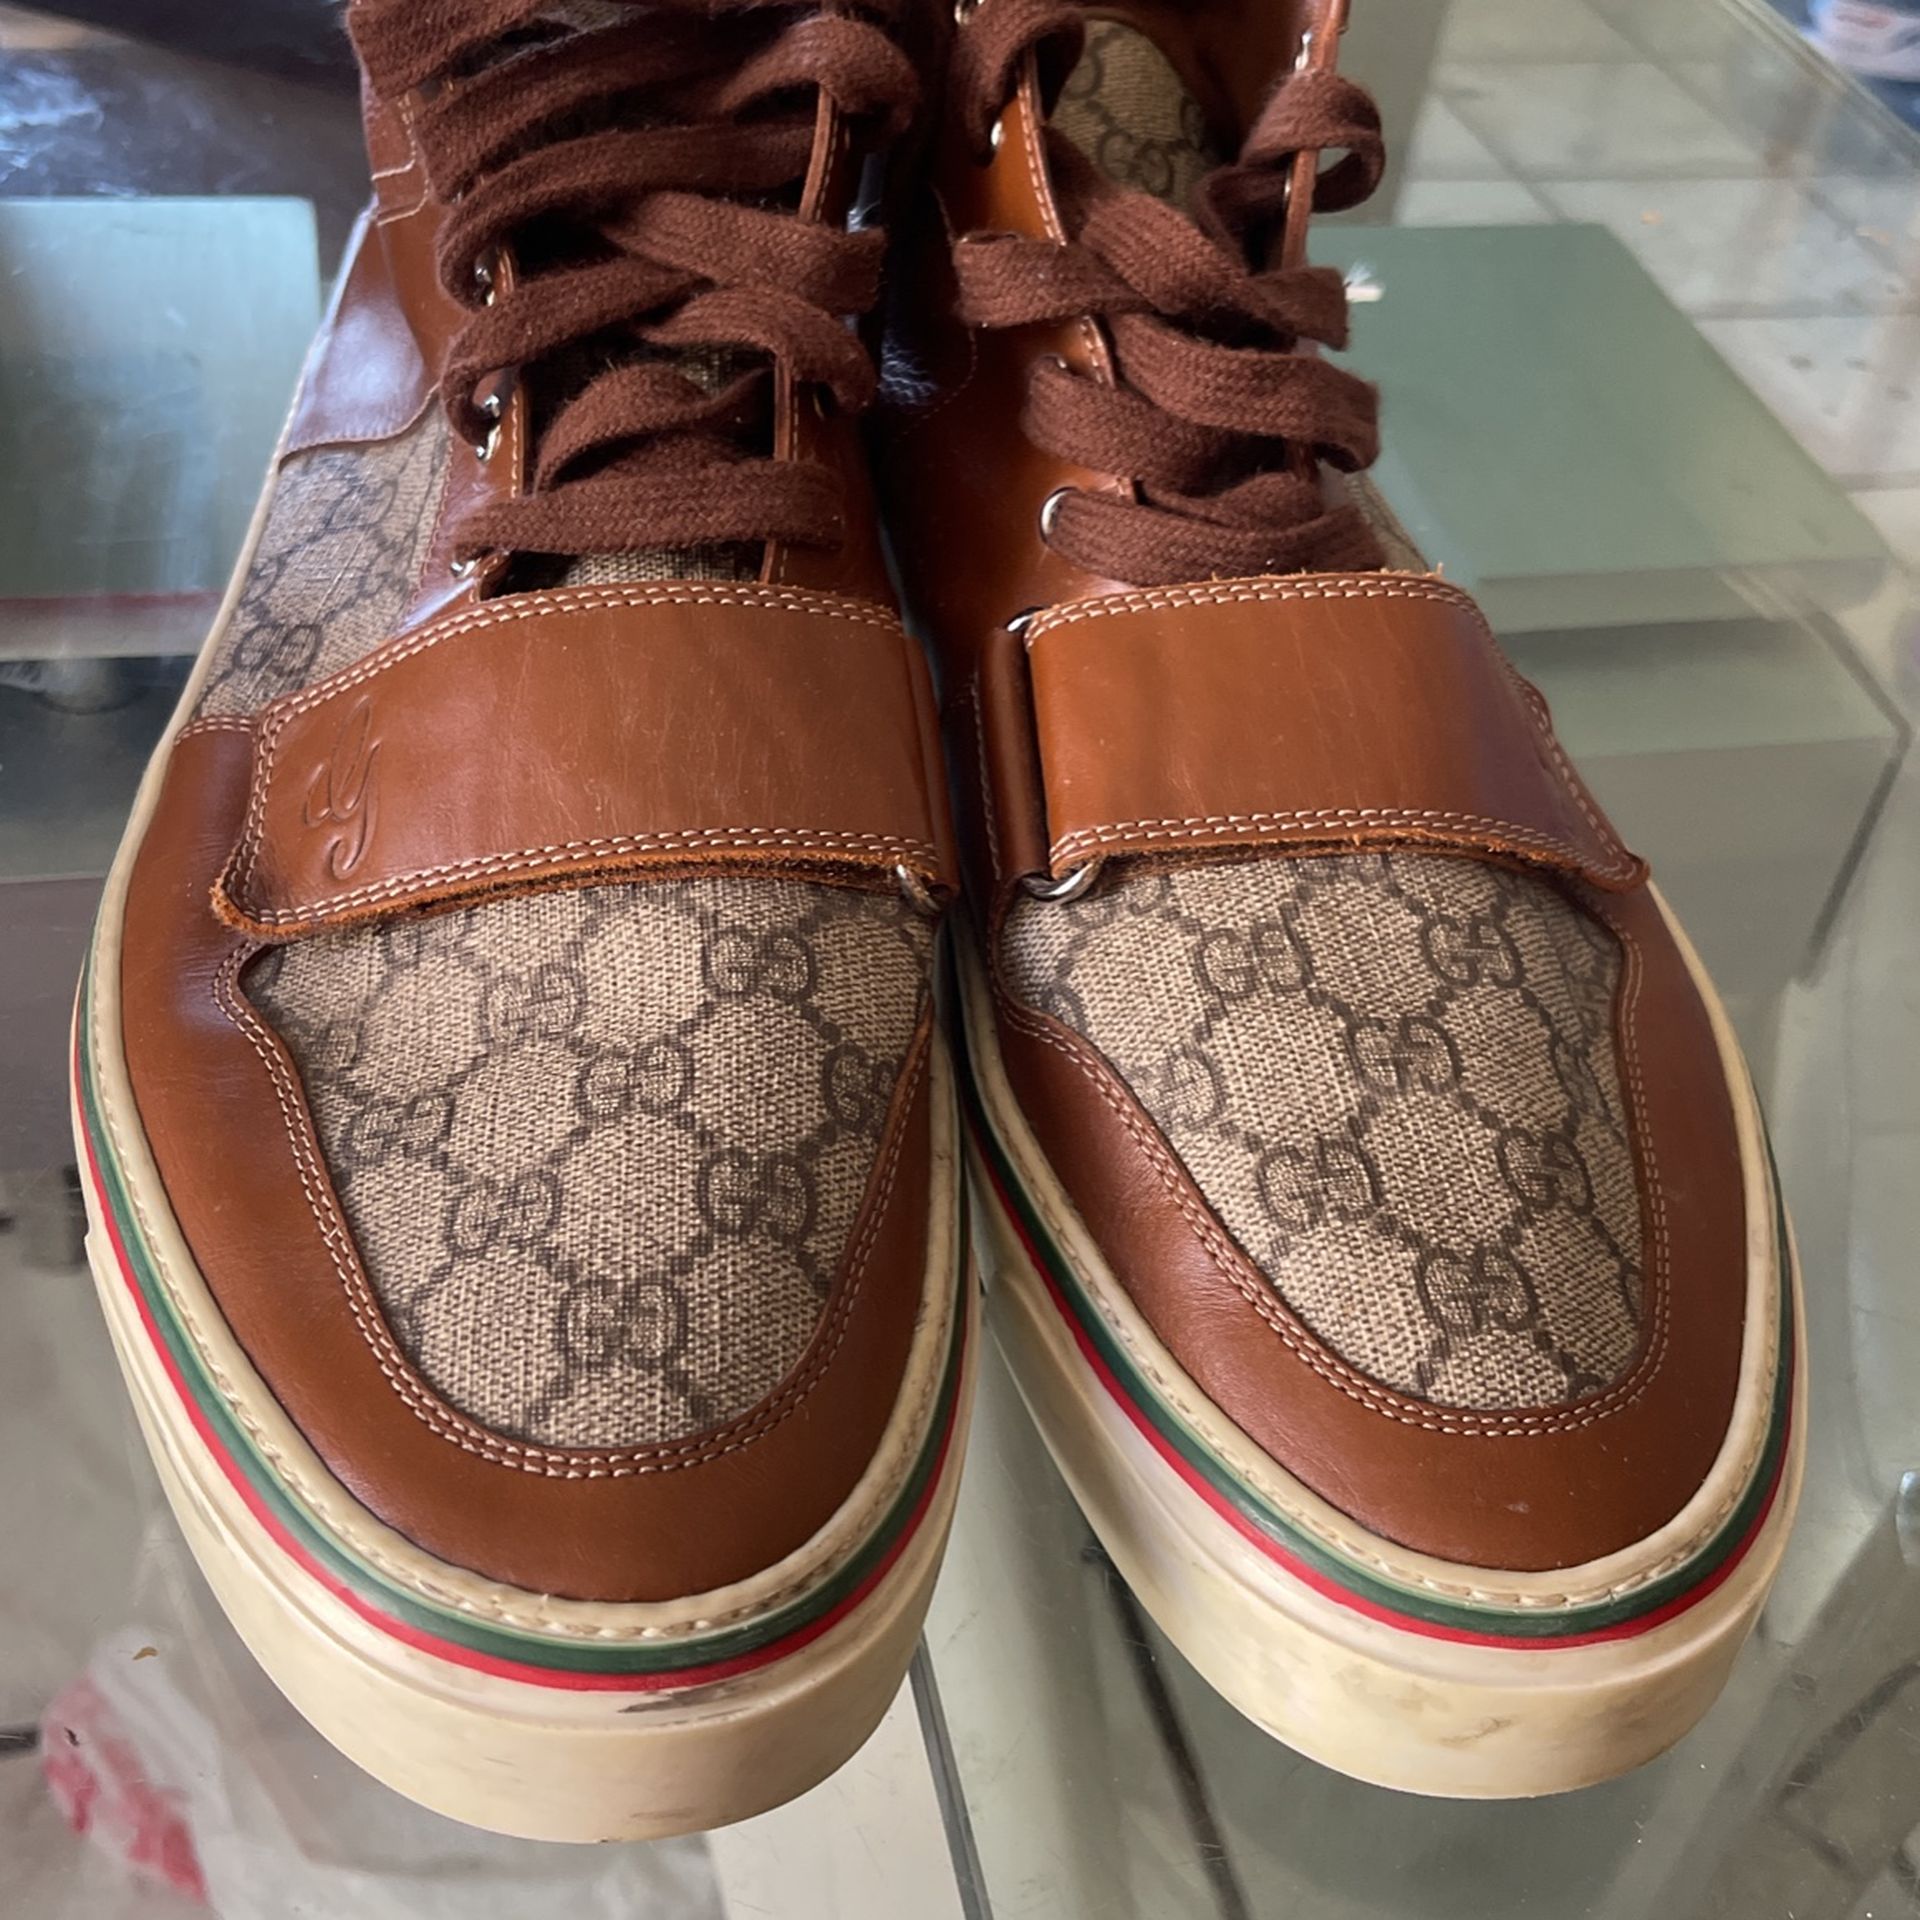 Gucci Shoes Size 14 1/2 Good Condition 